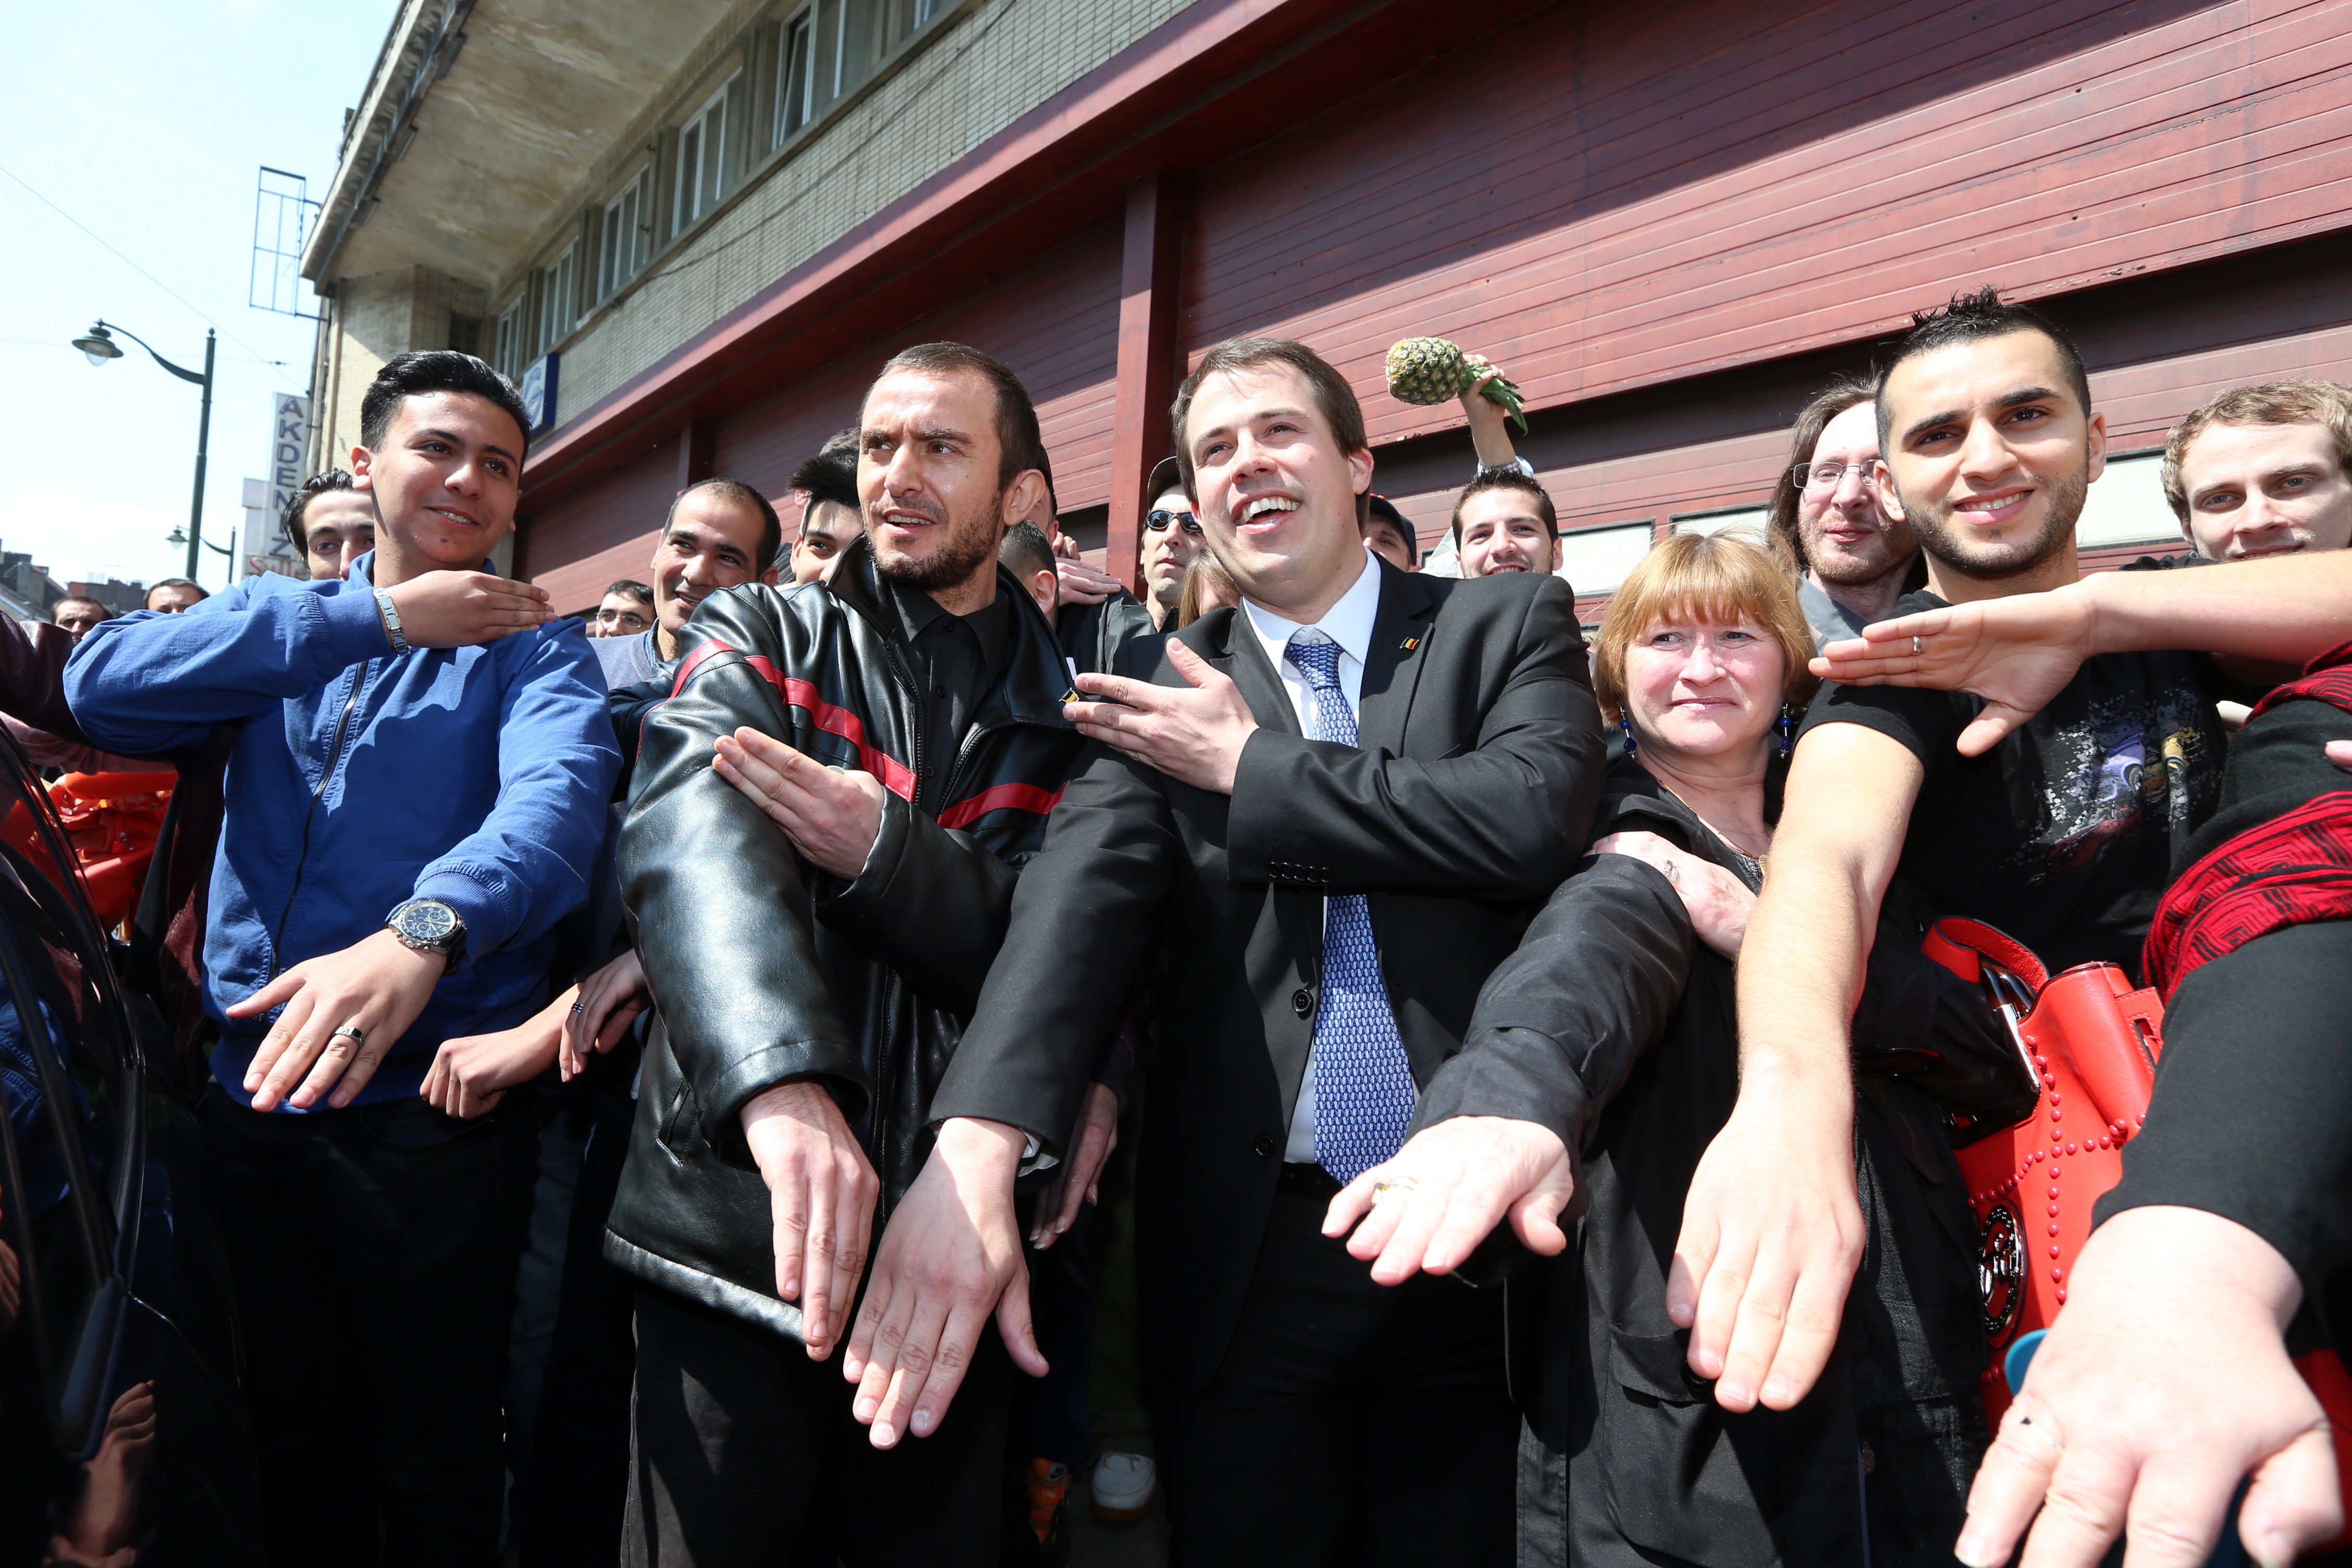 The leader of "Debout Les Belges!," far-right lawmaker Laurent Louis (C) perform the 'quenelle' gesture ahead of the anti-Semitic congress, "First European Conference of Dissidence", organised by Chamber member Laurent Louis in Anderlecht, outside Brussels, on May 4, 2014. (NICOLAS MAETERLINCK—AFP/Getty Images)